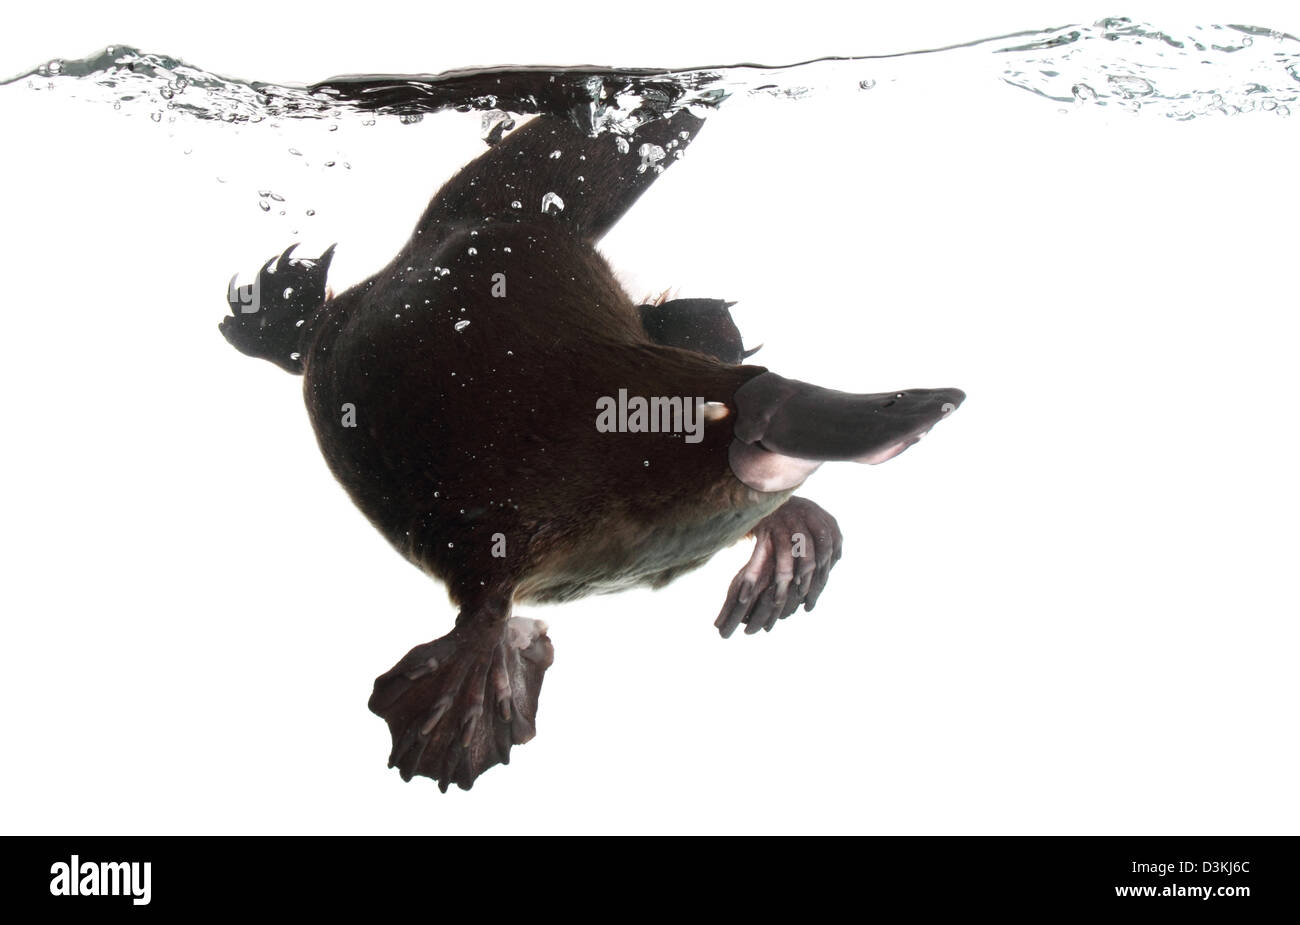 duck-billed platypus ornithorhynchus anatinus photographed in a studio with a white background ready for cut-out Stock Photo